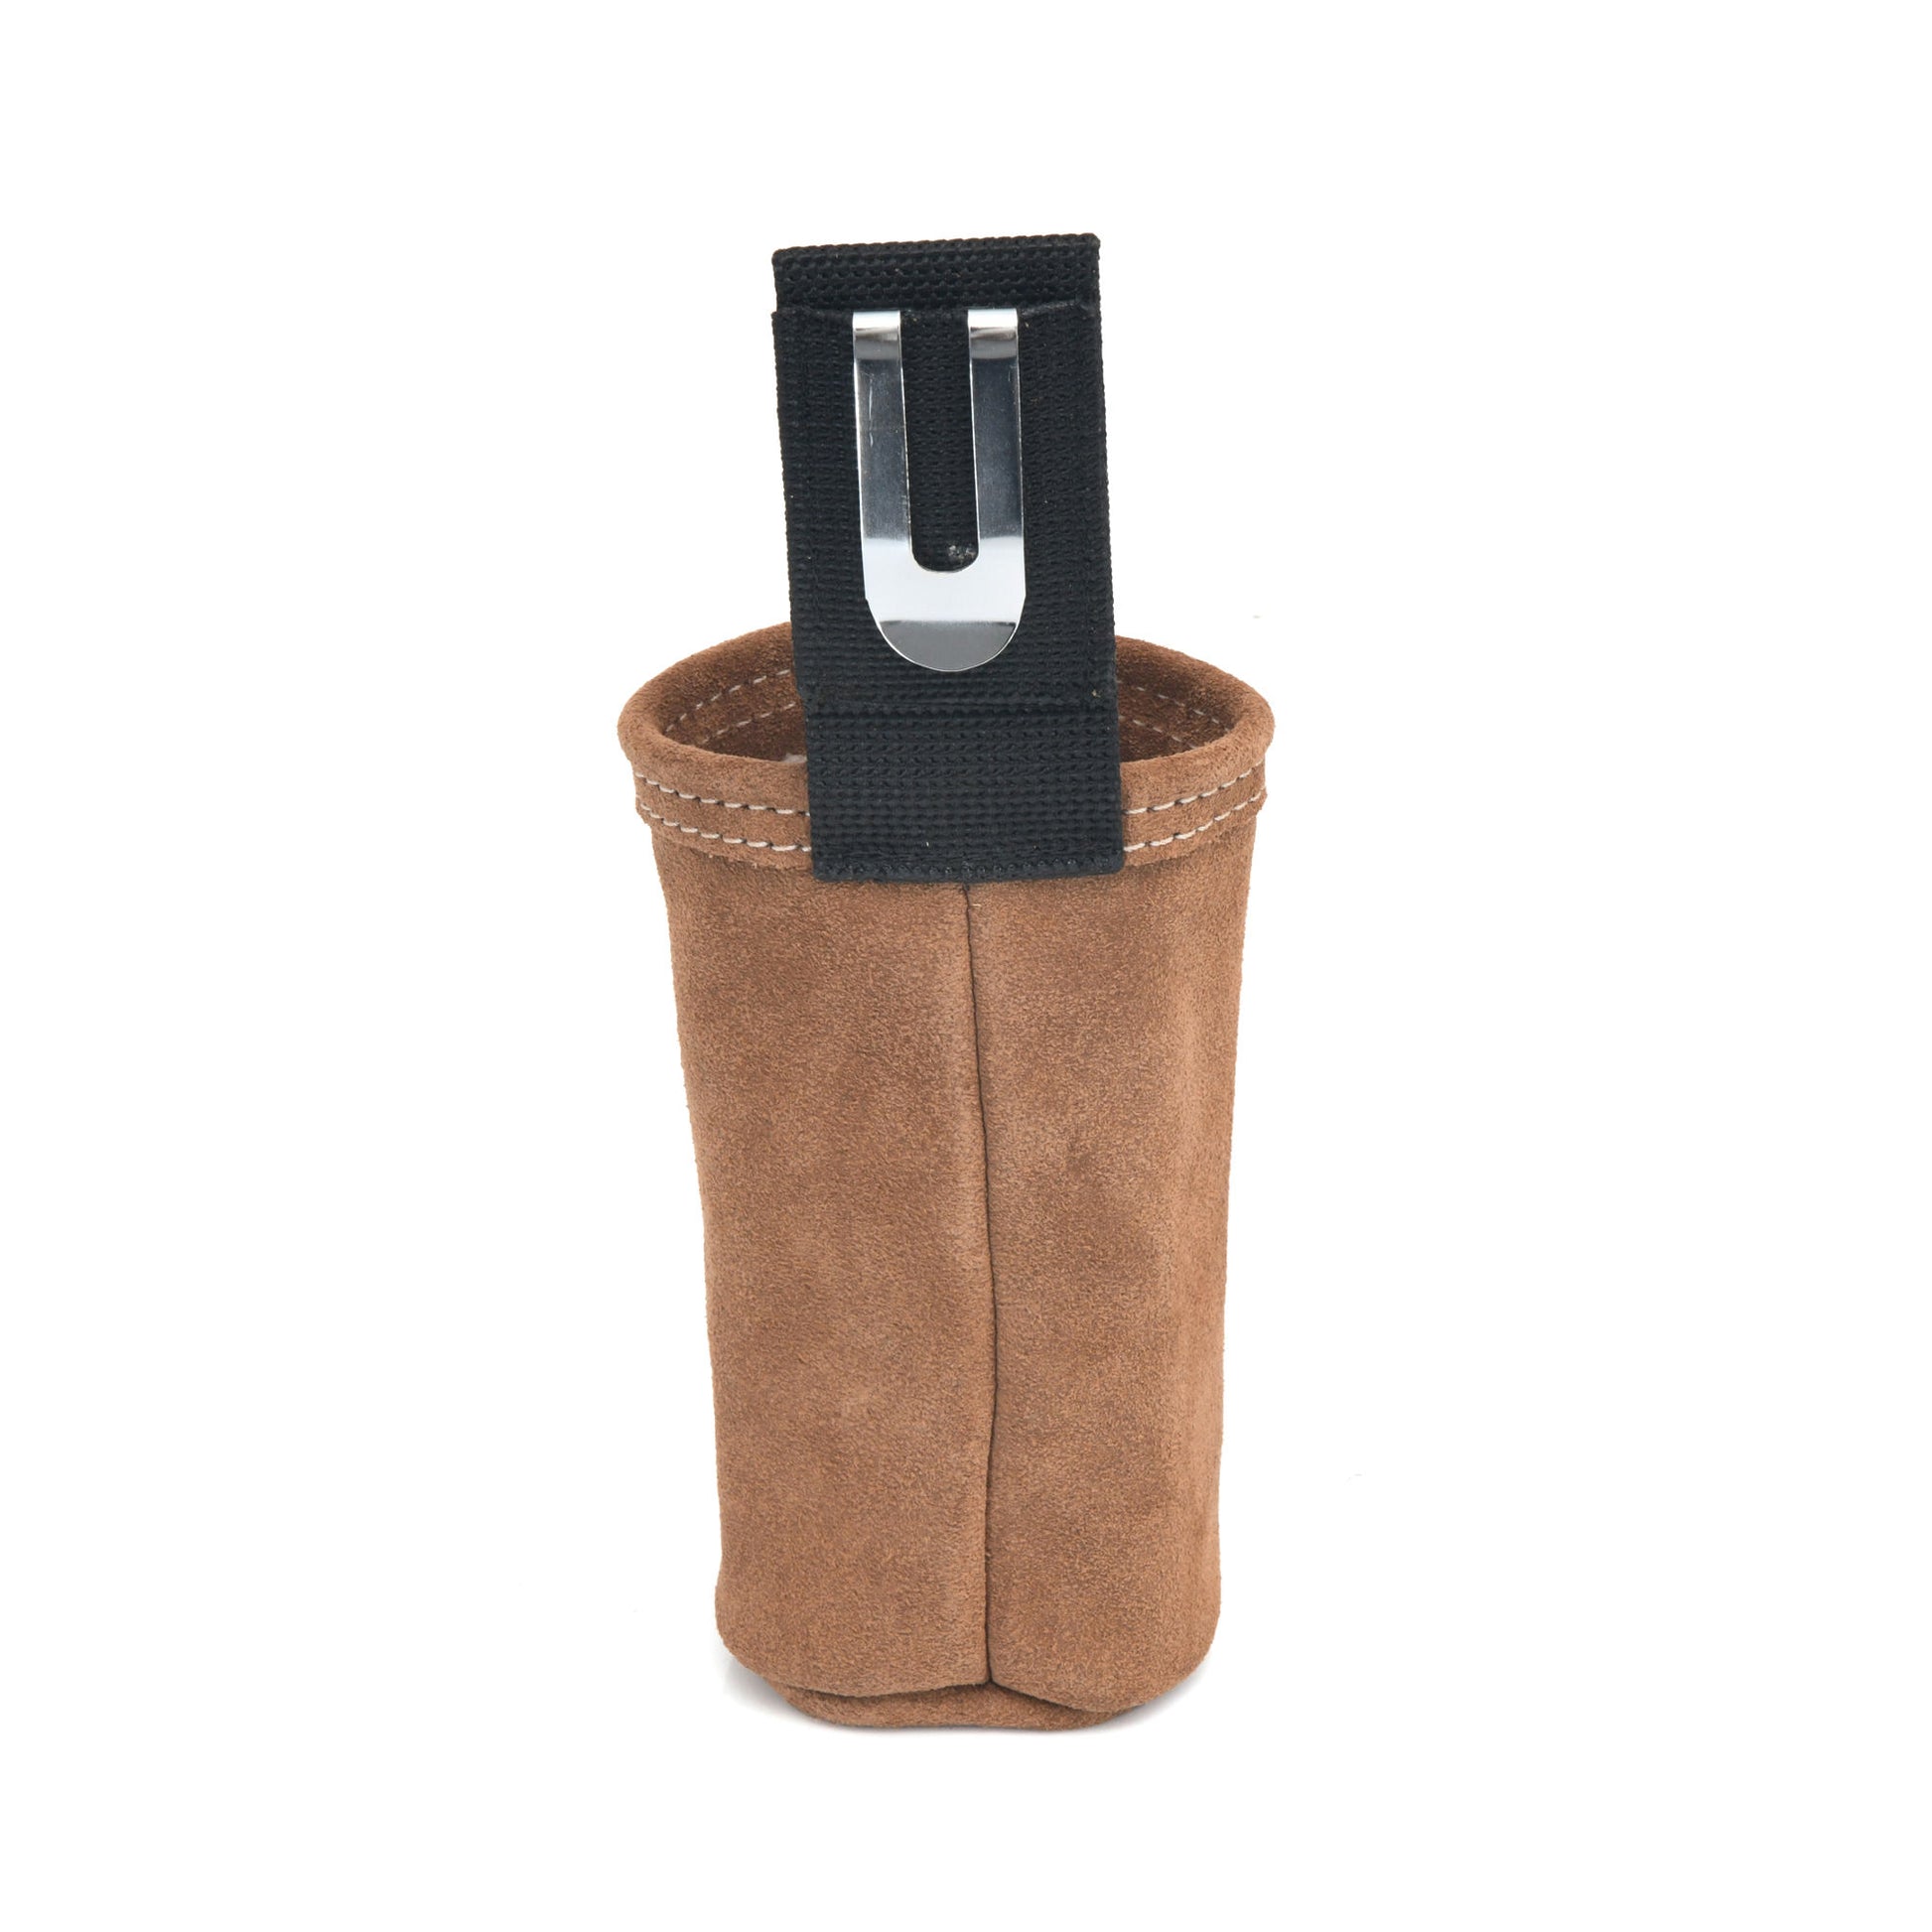 Style n Craft 88022 - Spray Paint Can Holder in Heavy Duty Suede Leather in Dark Tan Color - Back View Showing the Metal Tape Clip